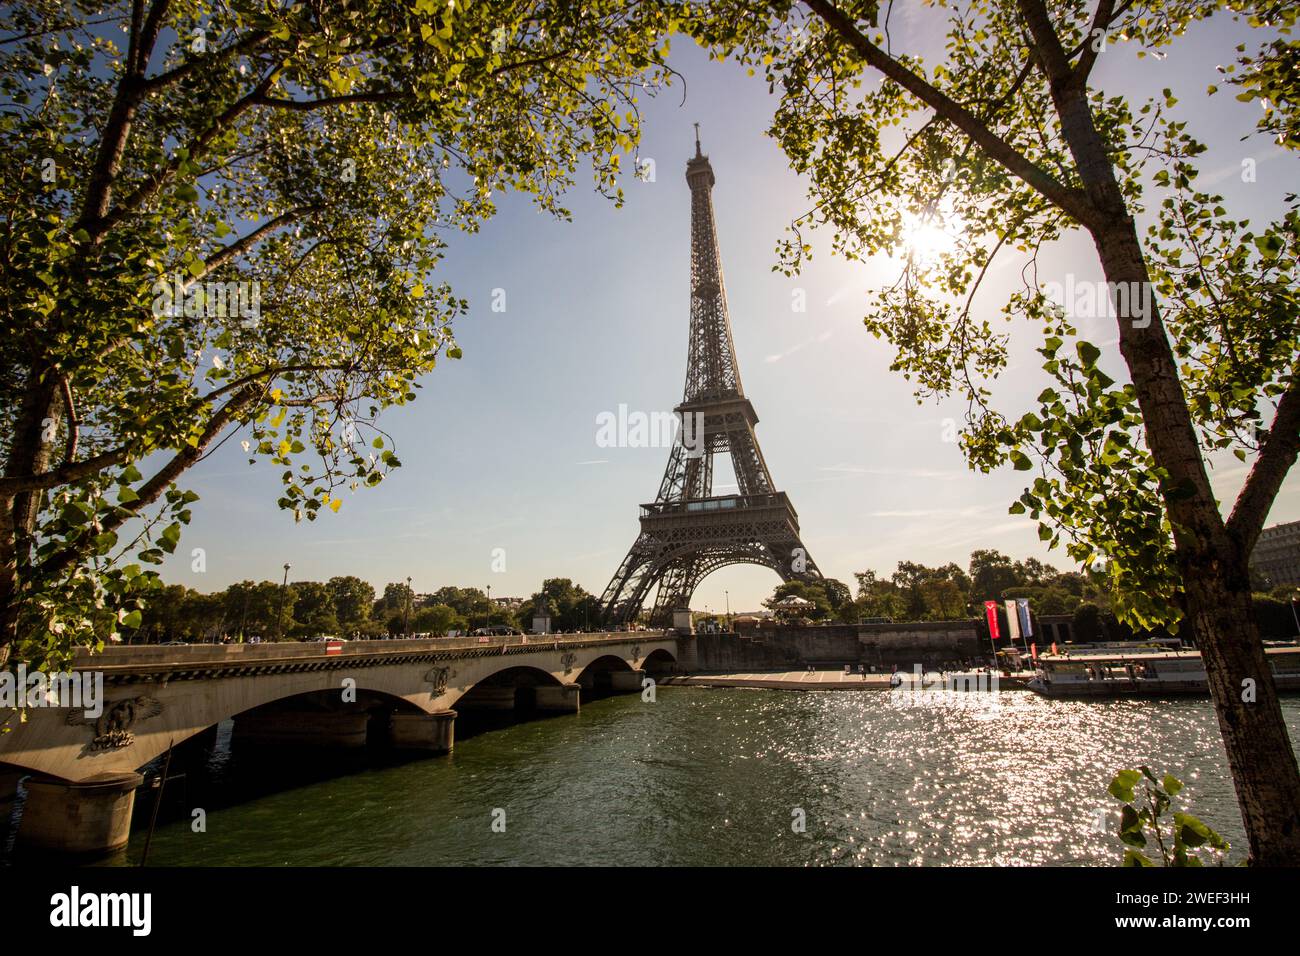 France, Paris on 2016-10-03. Daily life and tourism in Paris on the Trocadero near the Eiffel Tower. Photograph by Martin Bertrand. France, Paris le 2 Stock Photo